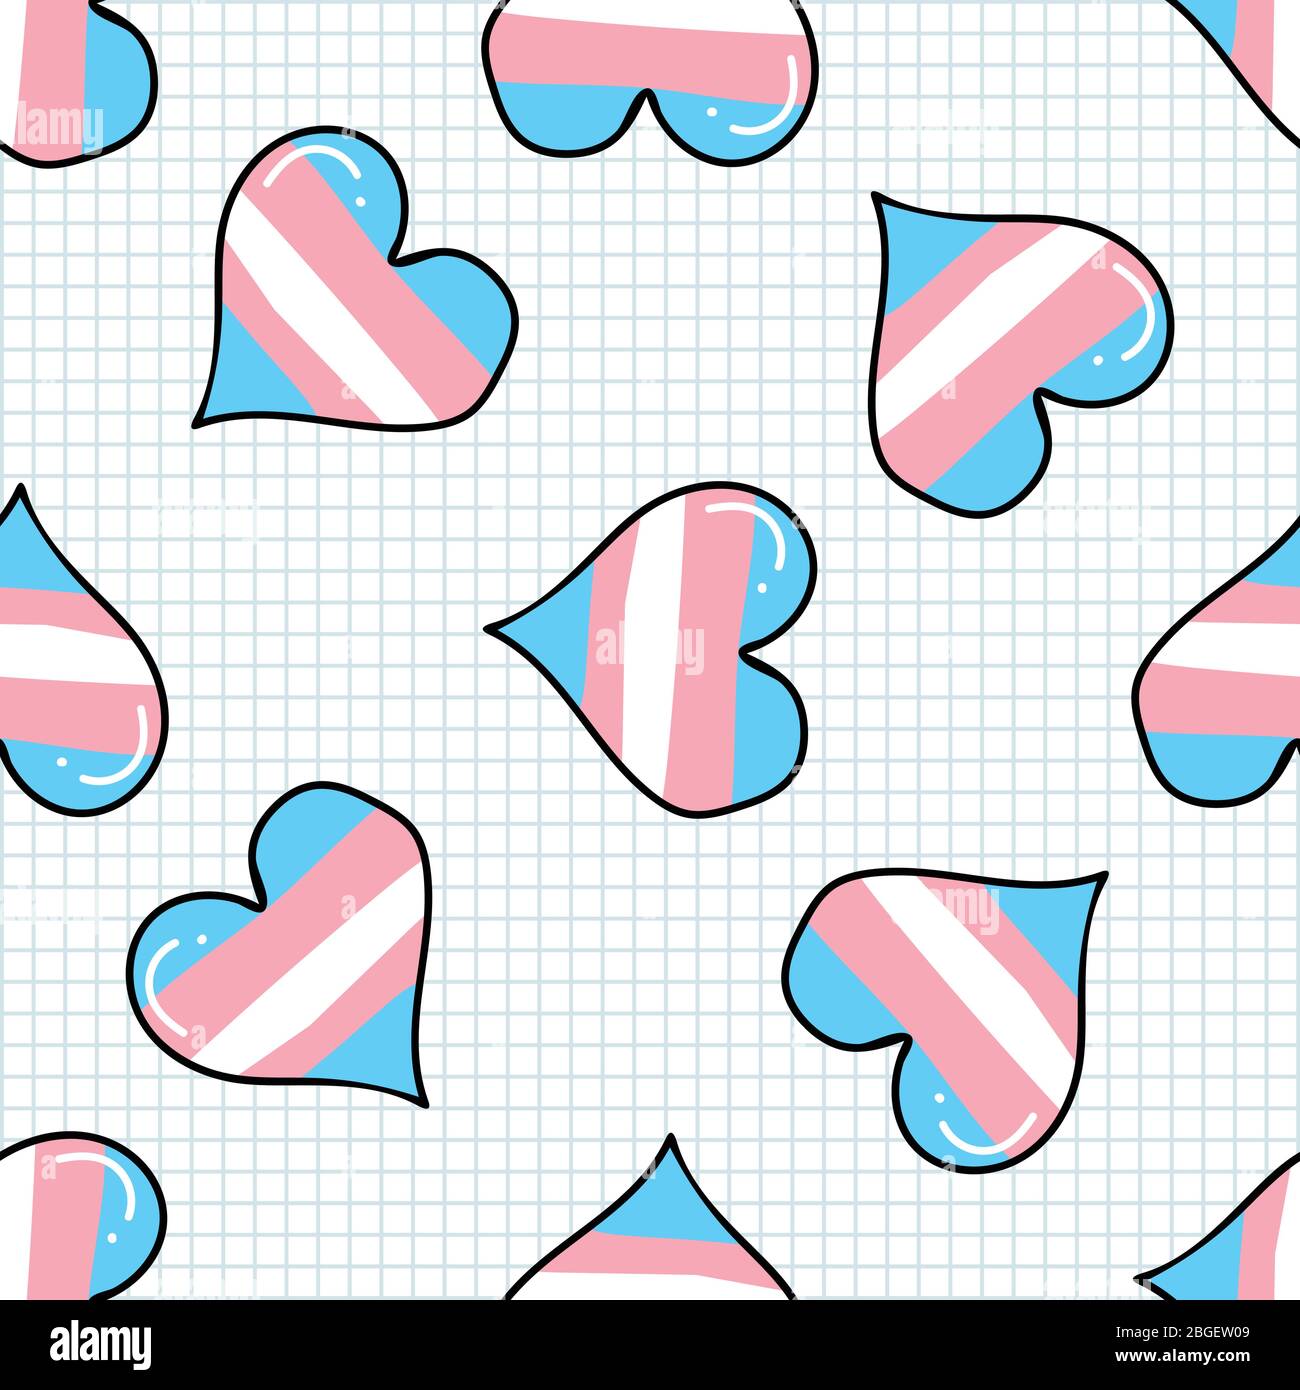 Cute Transgender Heart Cartoon Seamless Vector Pattern Hand Drawn Isolated Pride Flag For Lgbtq